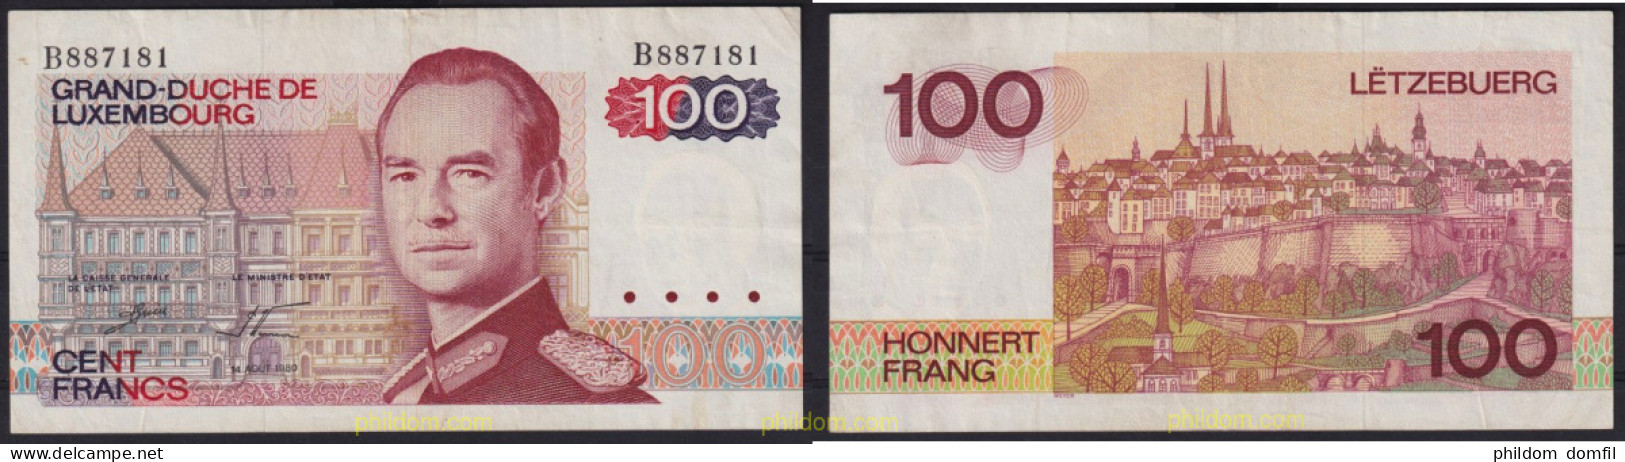 3364 LUXEMBURGO 1985 LUXEMBOURG 1000 FRANCS 1985 - Luxembourg